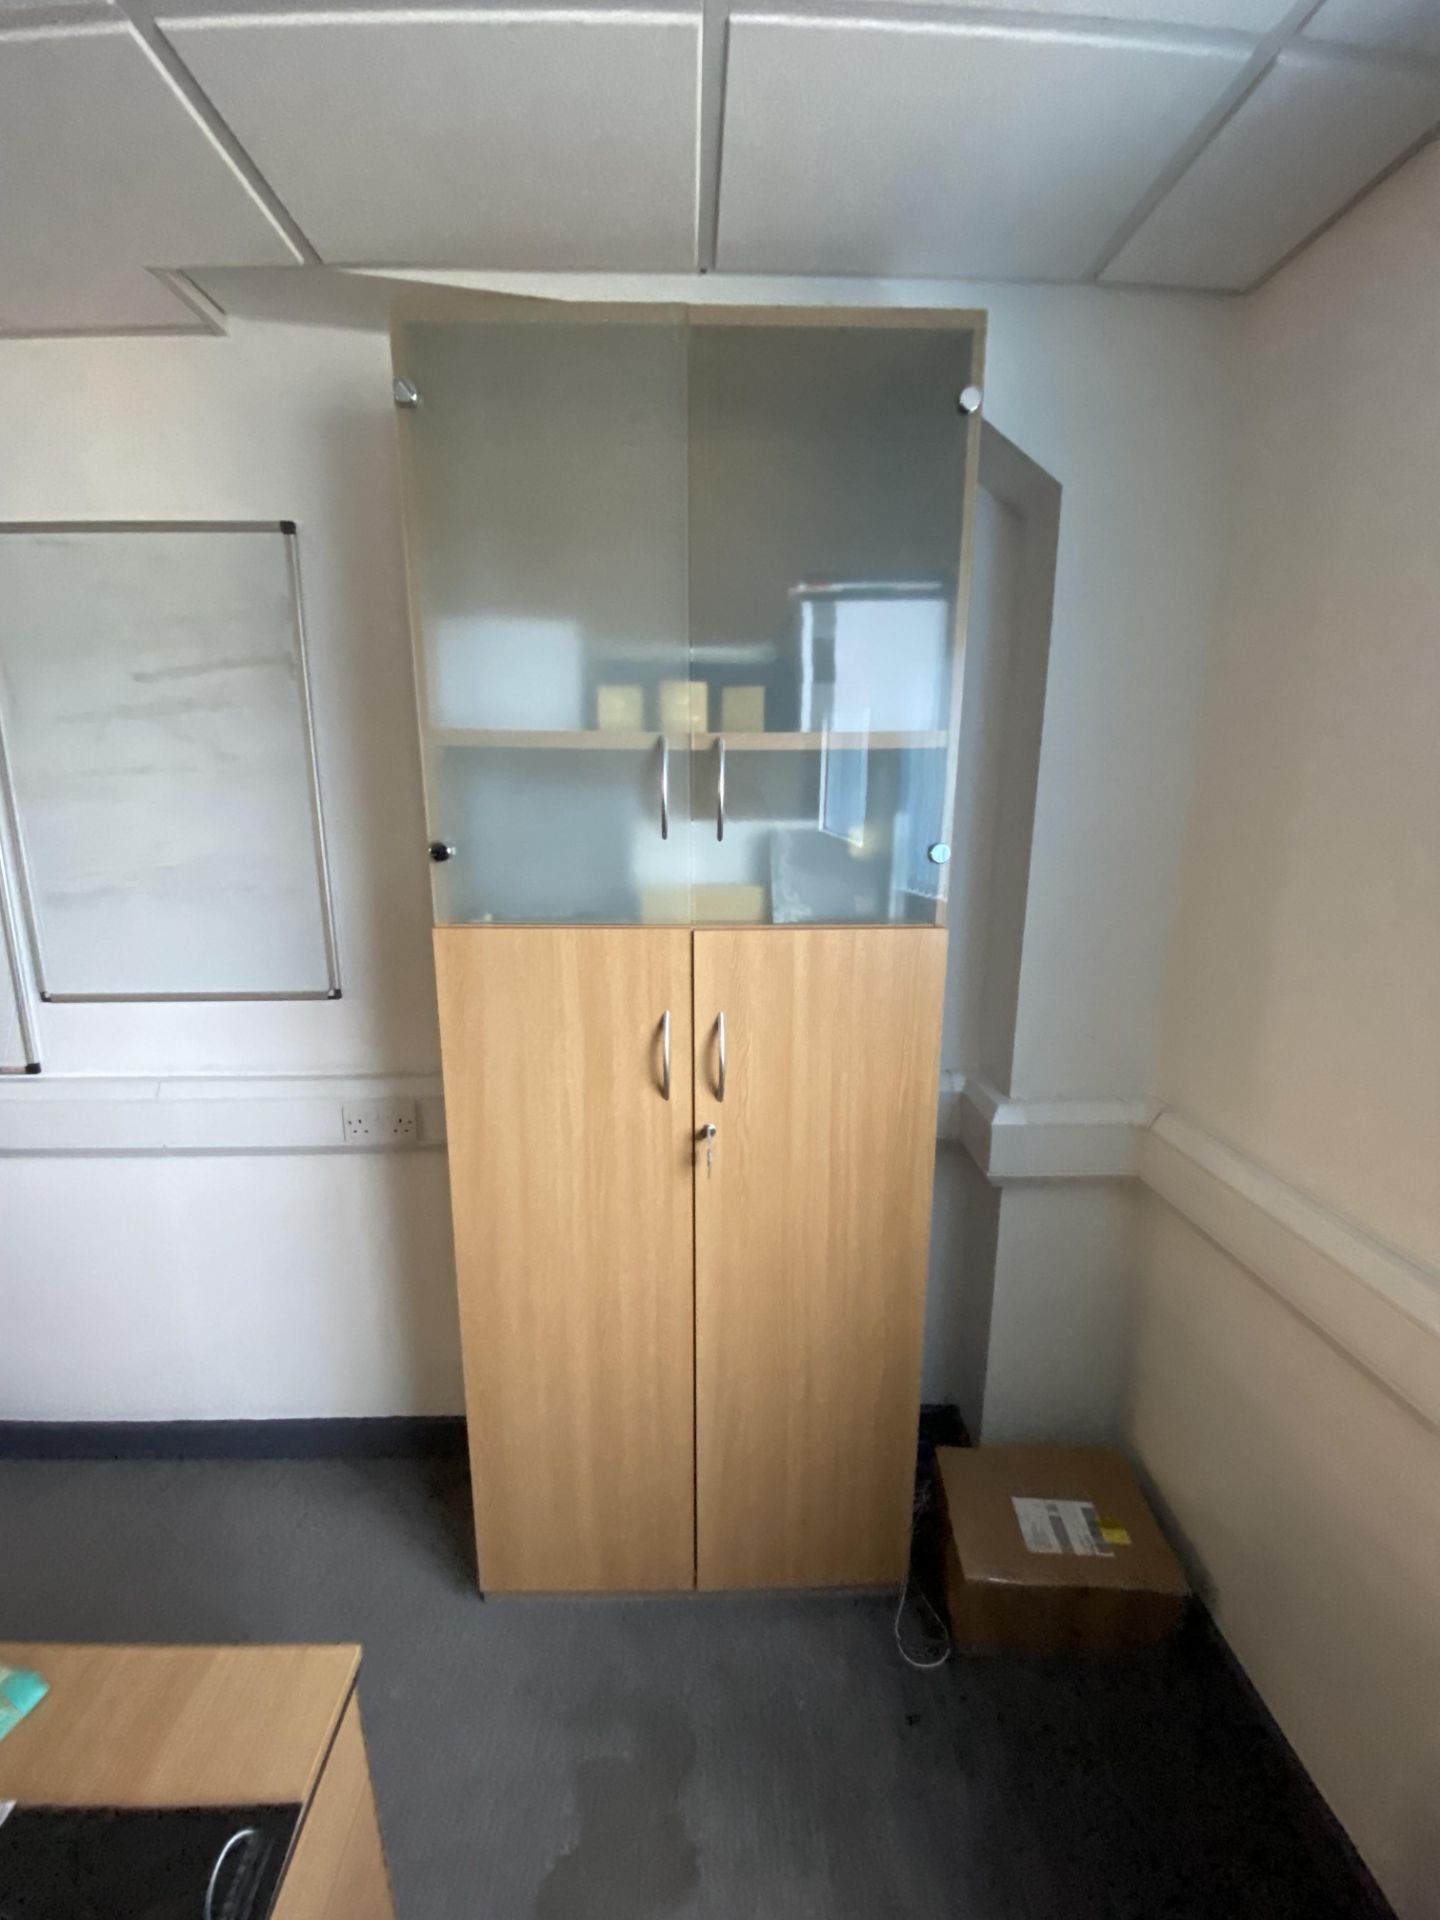 Two wood effect storage cupboards - Image 2 of 3